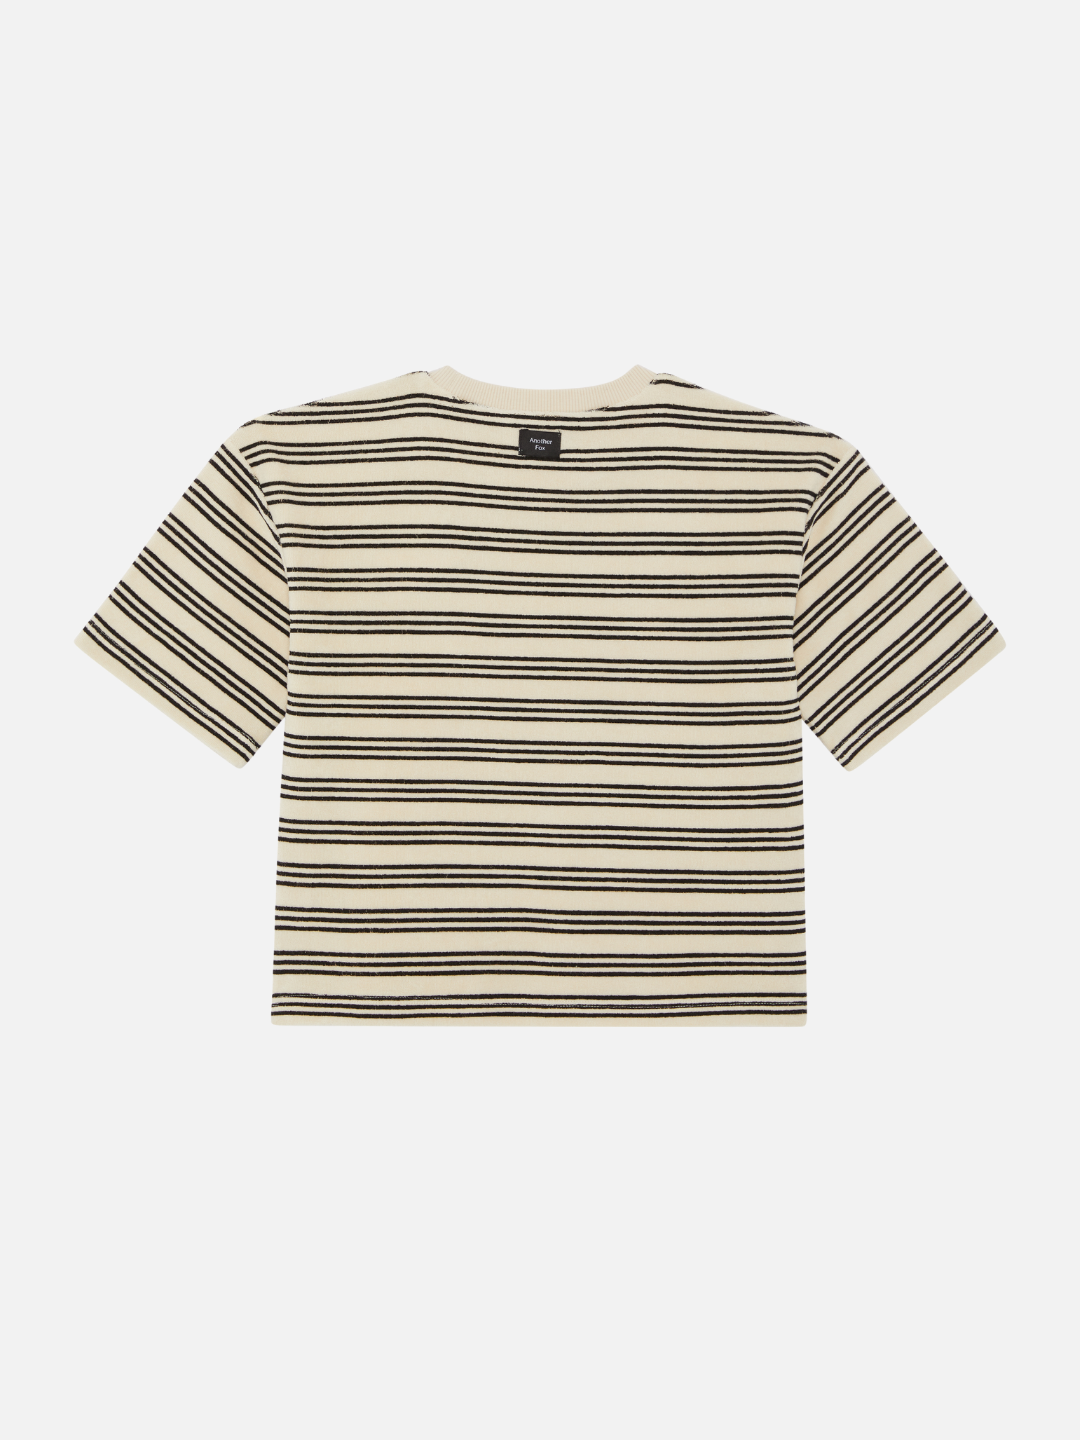 A back view of the kid's tee in stripe print